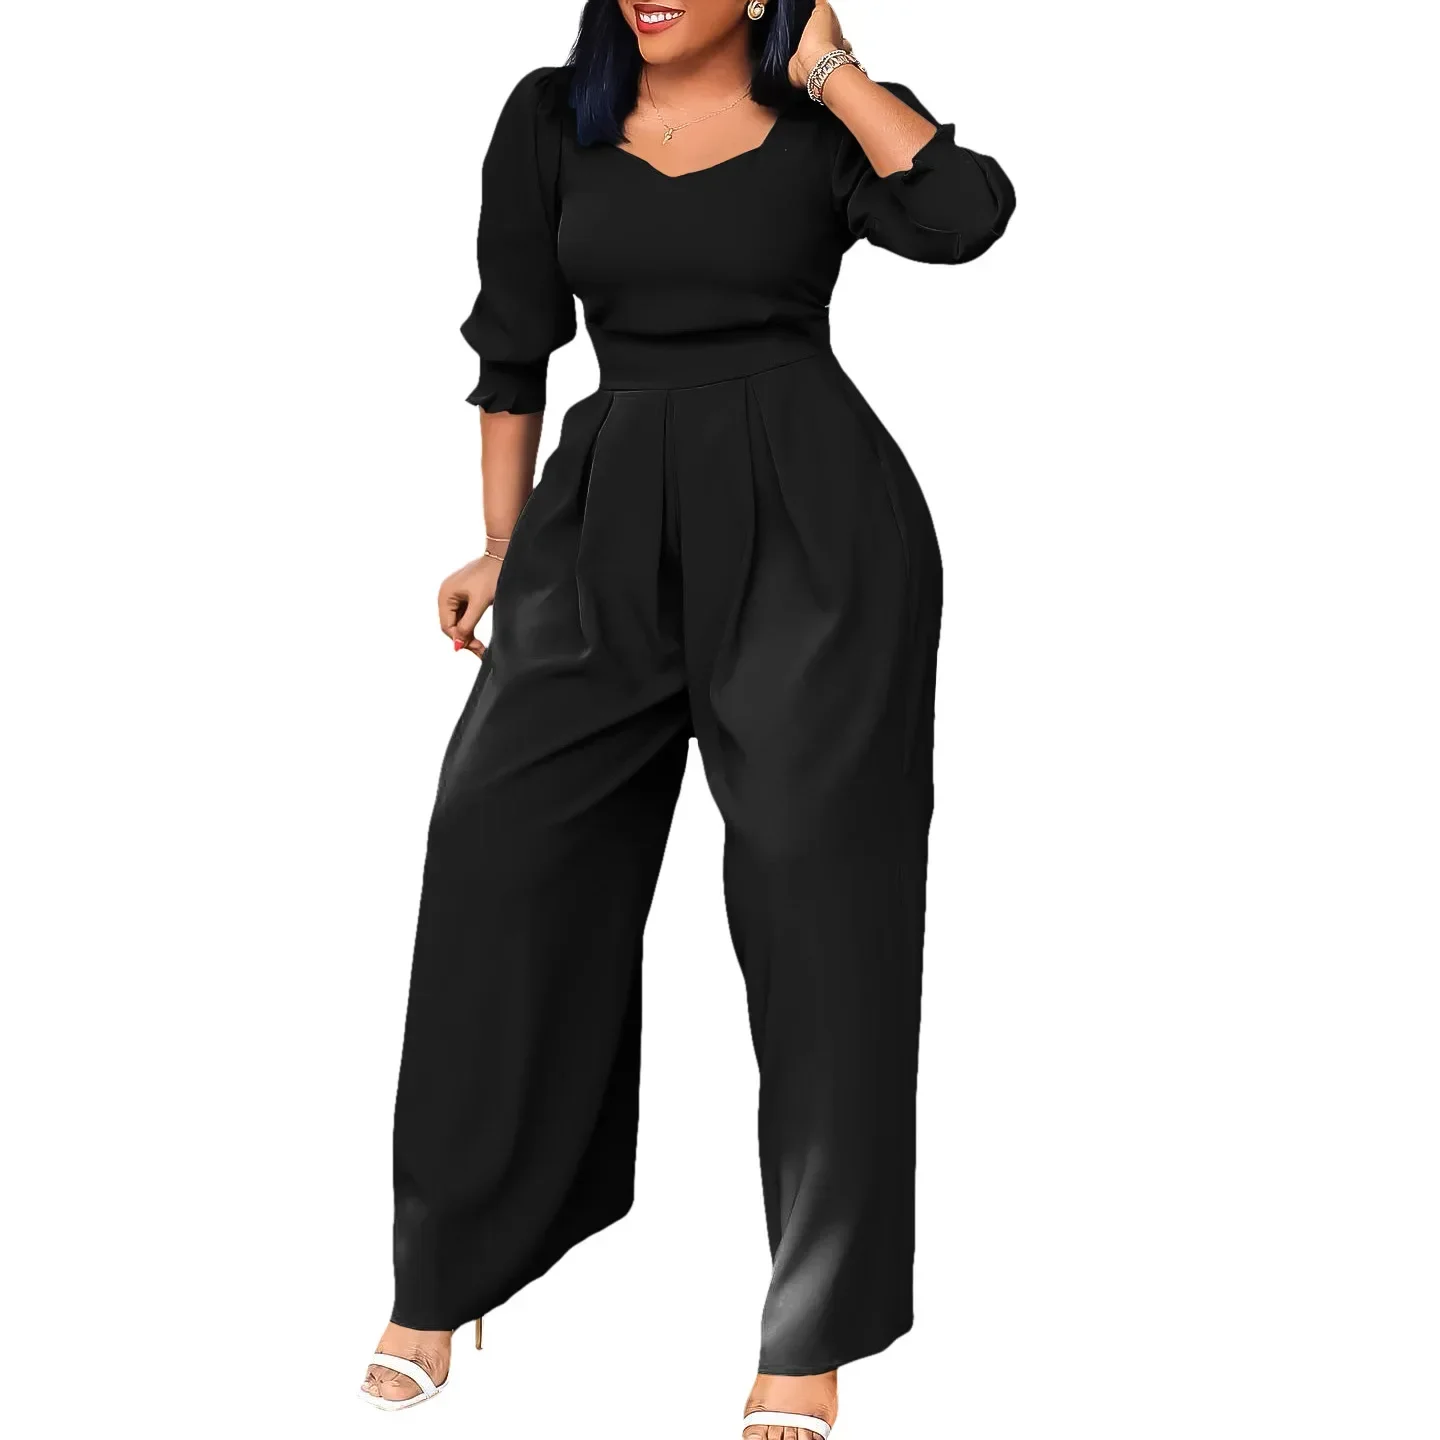 African Loose Jumpsuit Women Fashion Streetwear Jumpsuits Ladies Outfits Mamelucos Mujer Wide Leg Classy Party One Piece Romper sequin one piece jumpsuit sexy club party rompers 2023 fall winter women elegant luxury bodycon bodysuits ladies luxury jumpsuit